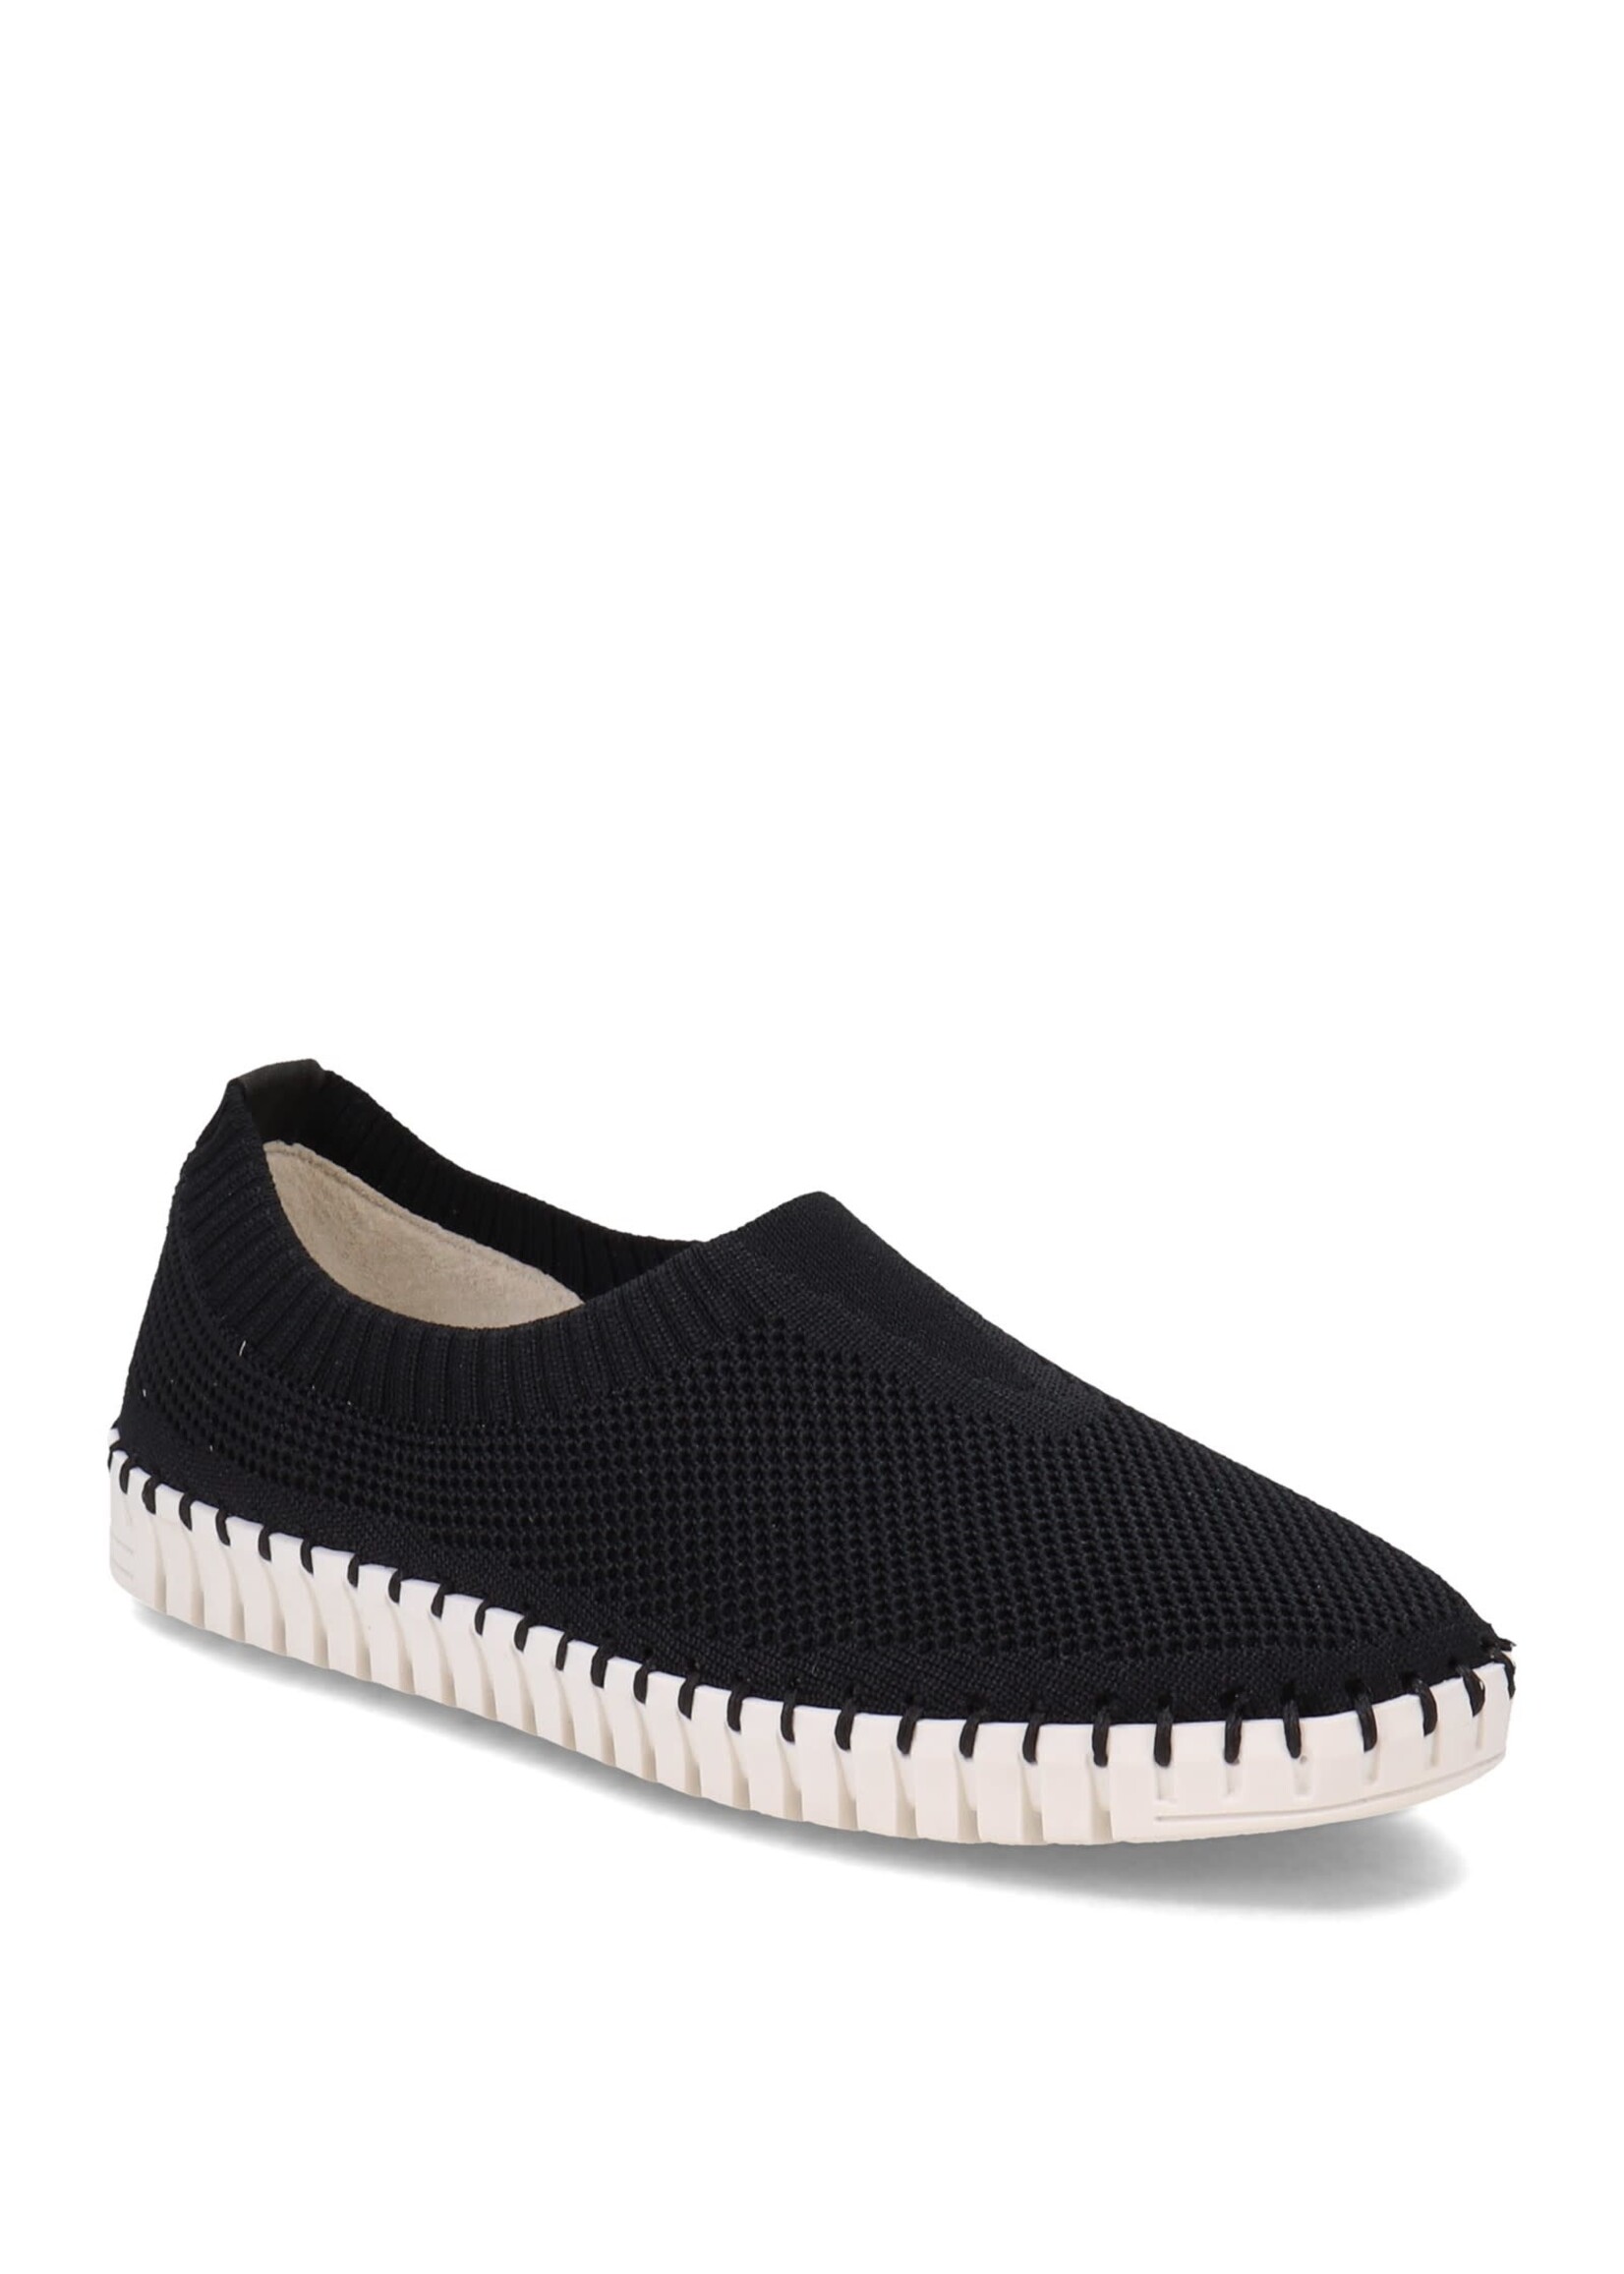 Eric Michael Lucy Black Slip On by Eric Michaels